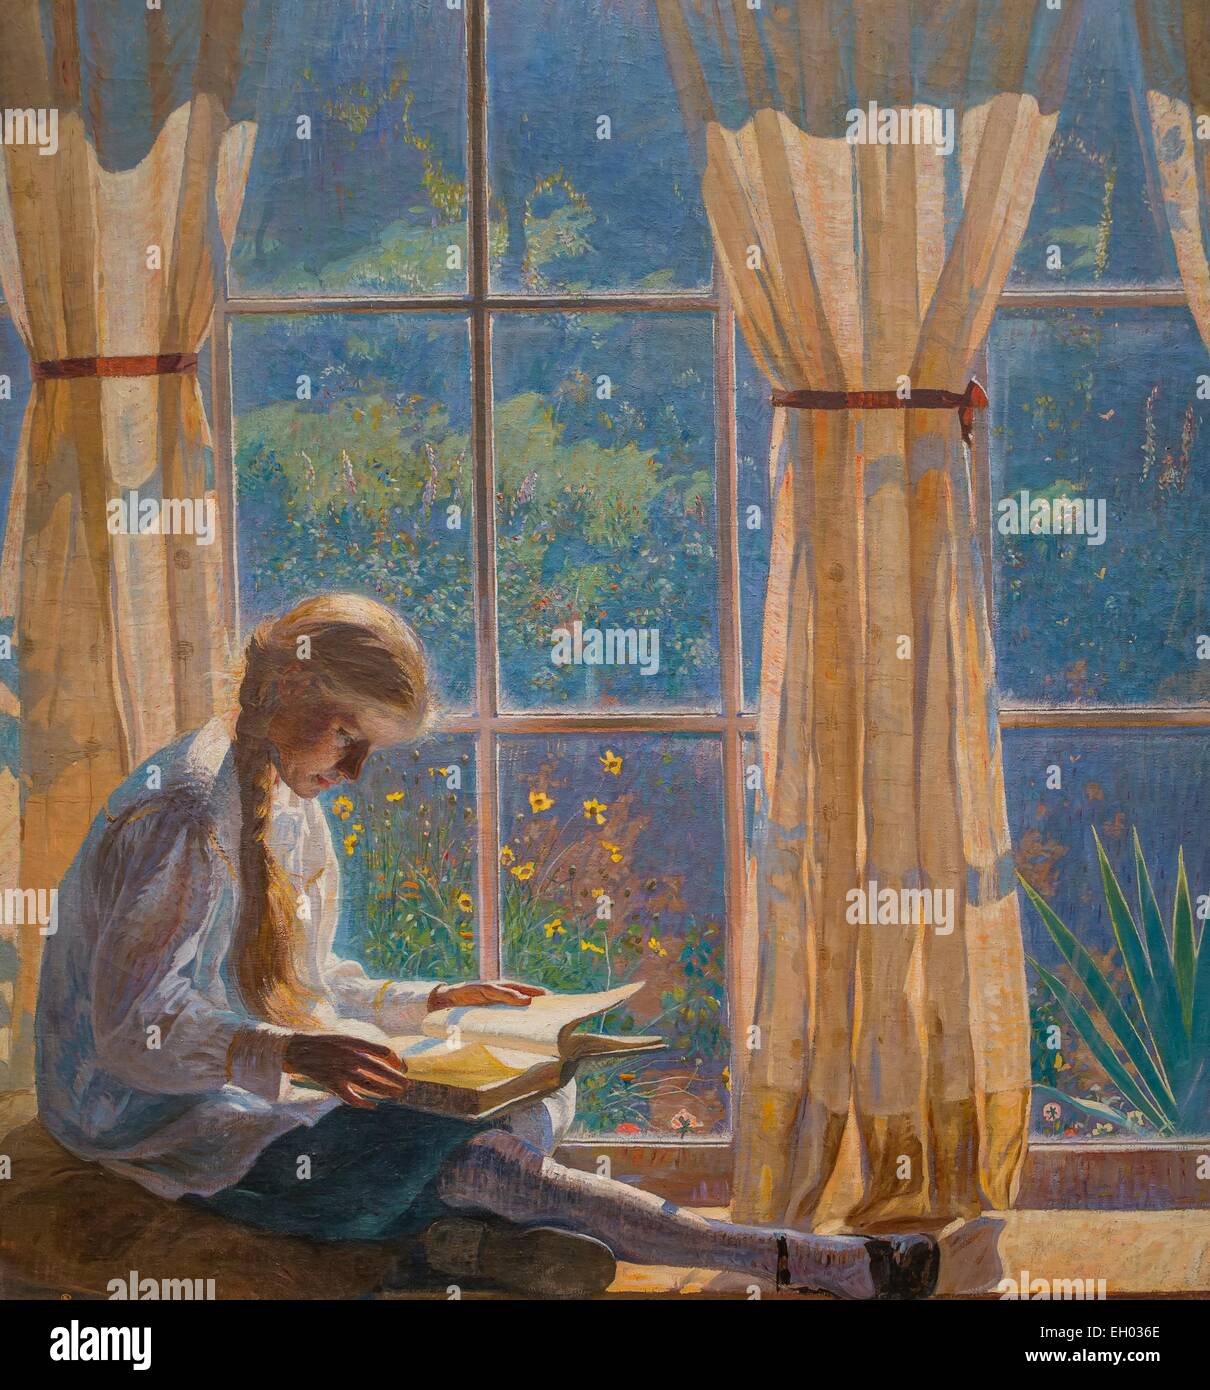 ActiveMuseum 0003290.jpg / The Orchard Window (Tanis artist's daughter) - oil on canvas 26/06/2013  -   / 20th century Collection / Active Museum Stock Photo